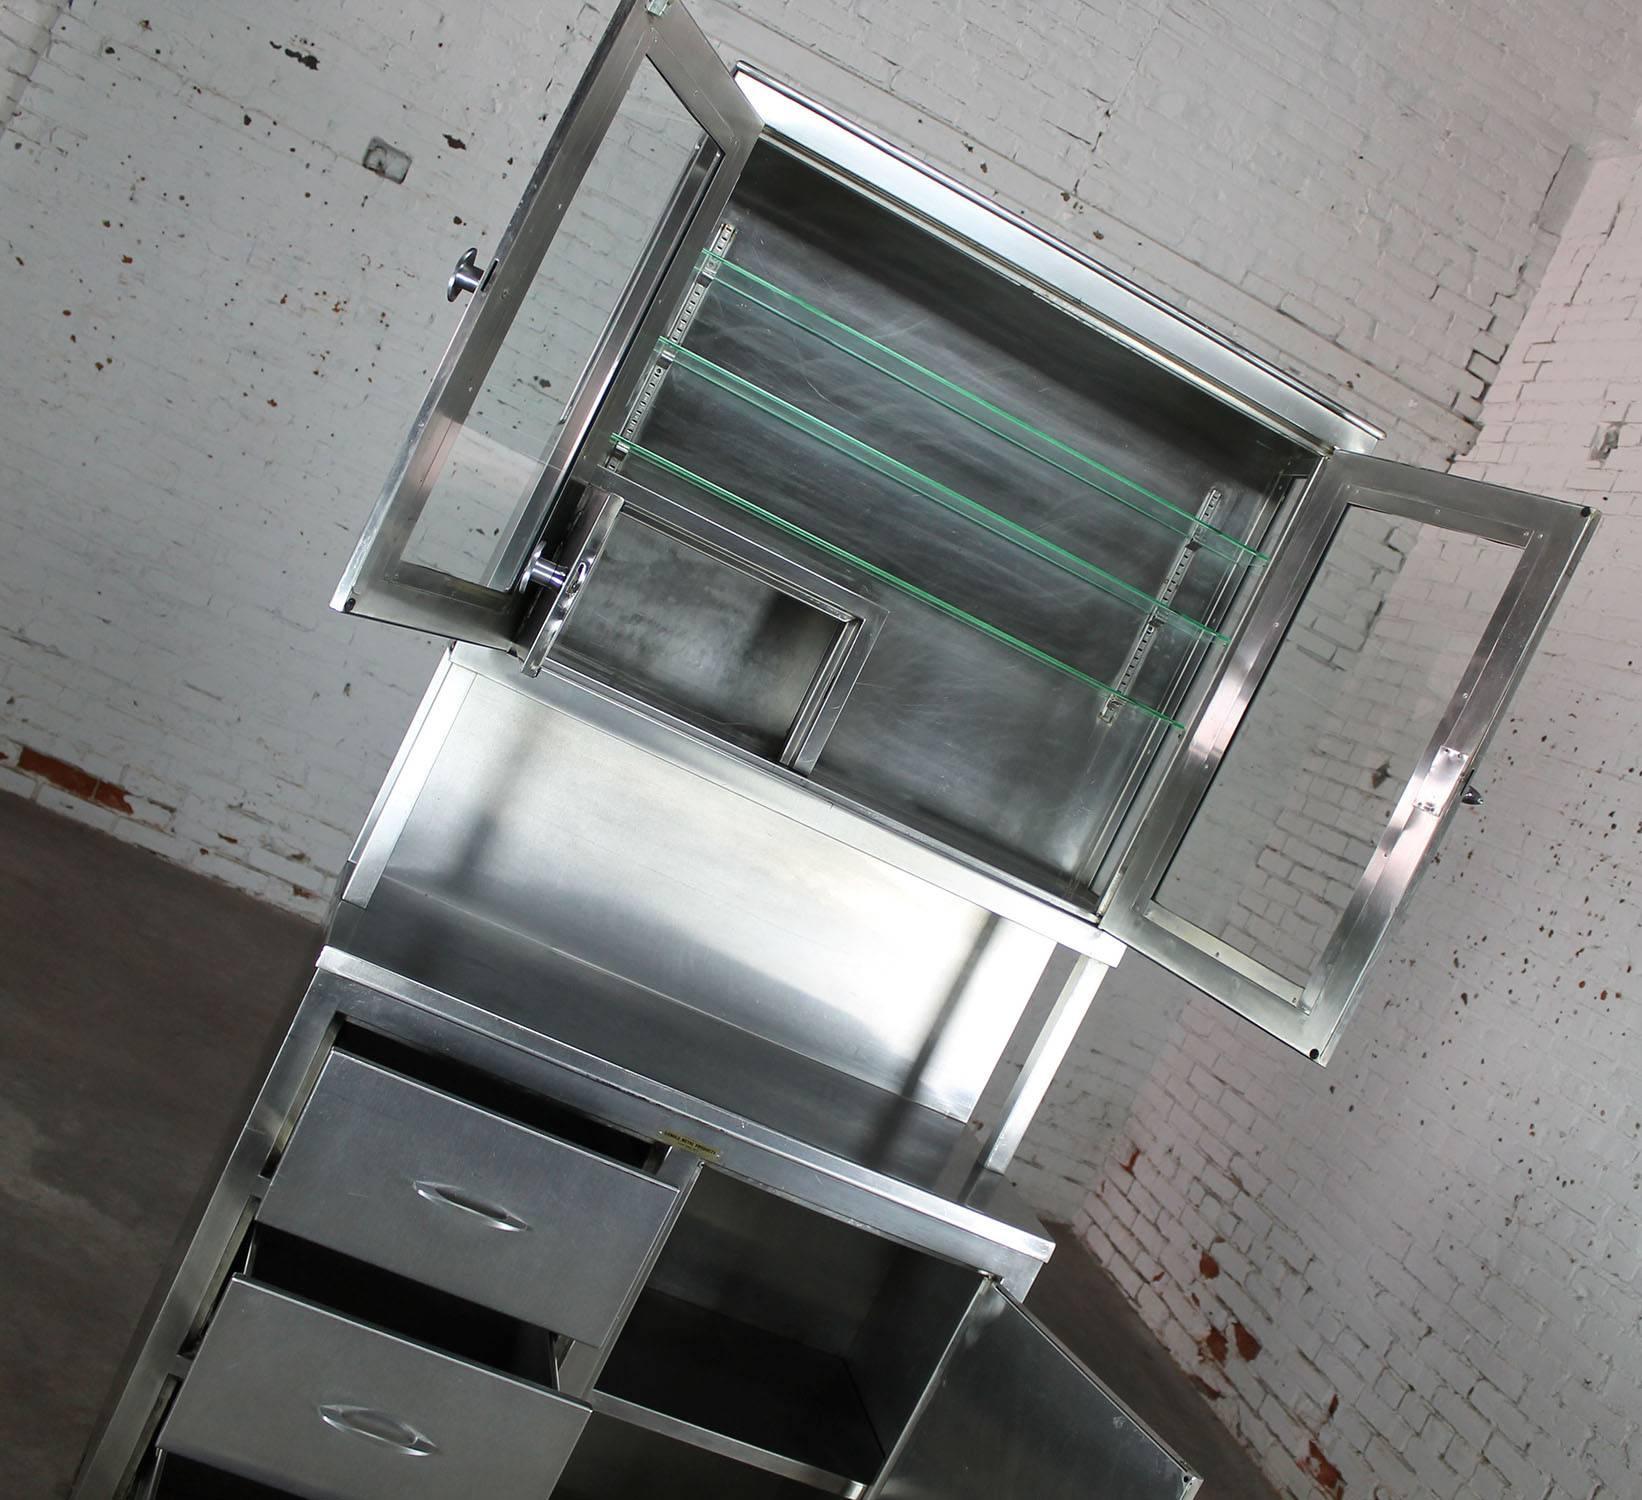 Incredible Industrial medical cupboard in stainless steel and glass. In good vintage condition.

Wow! What an awesome find for your Industrial loft kitchen or your backyard gazebo kitchen. Made in the style of an old kitchen cupboard with a solid